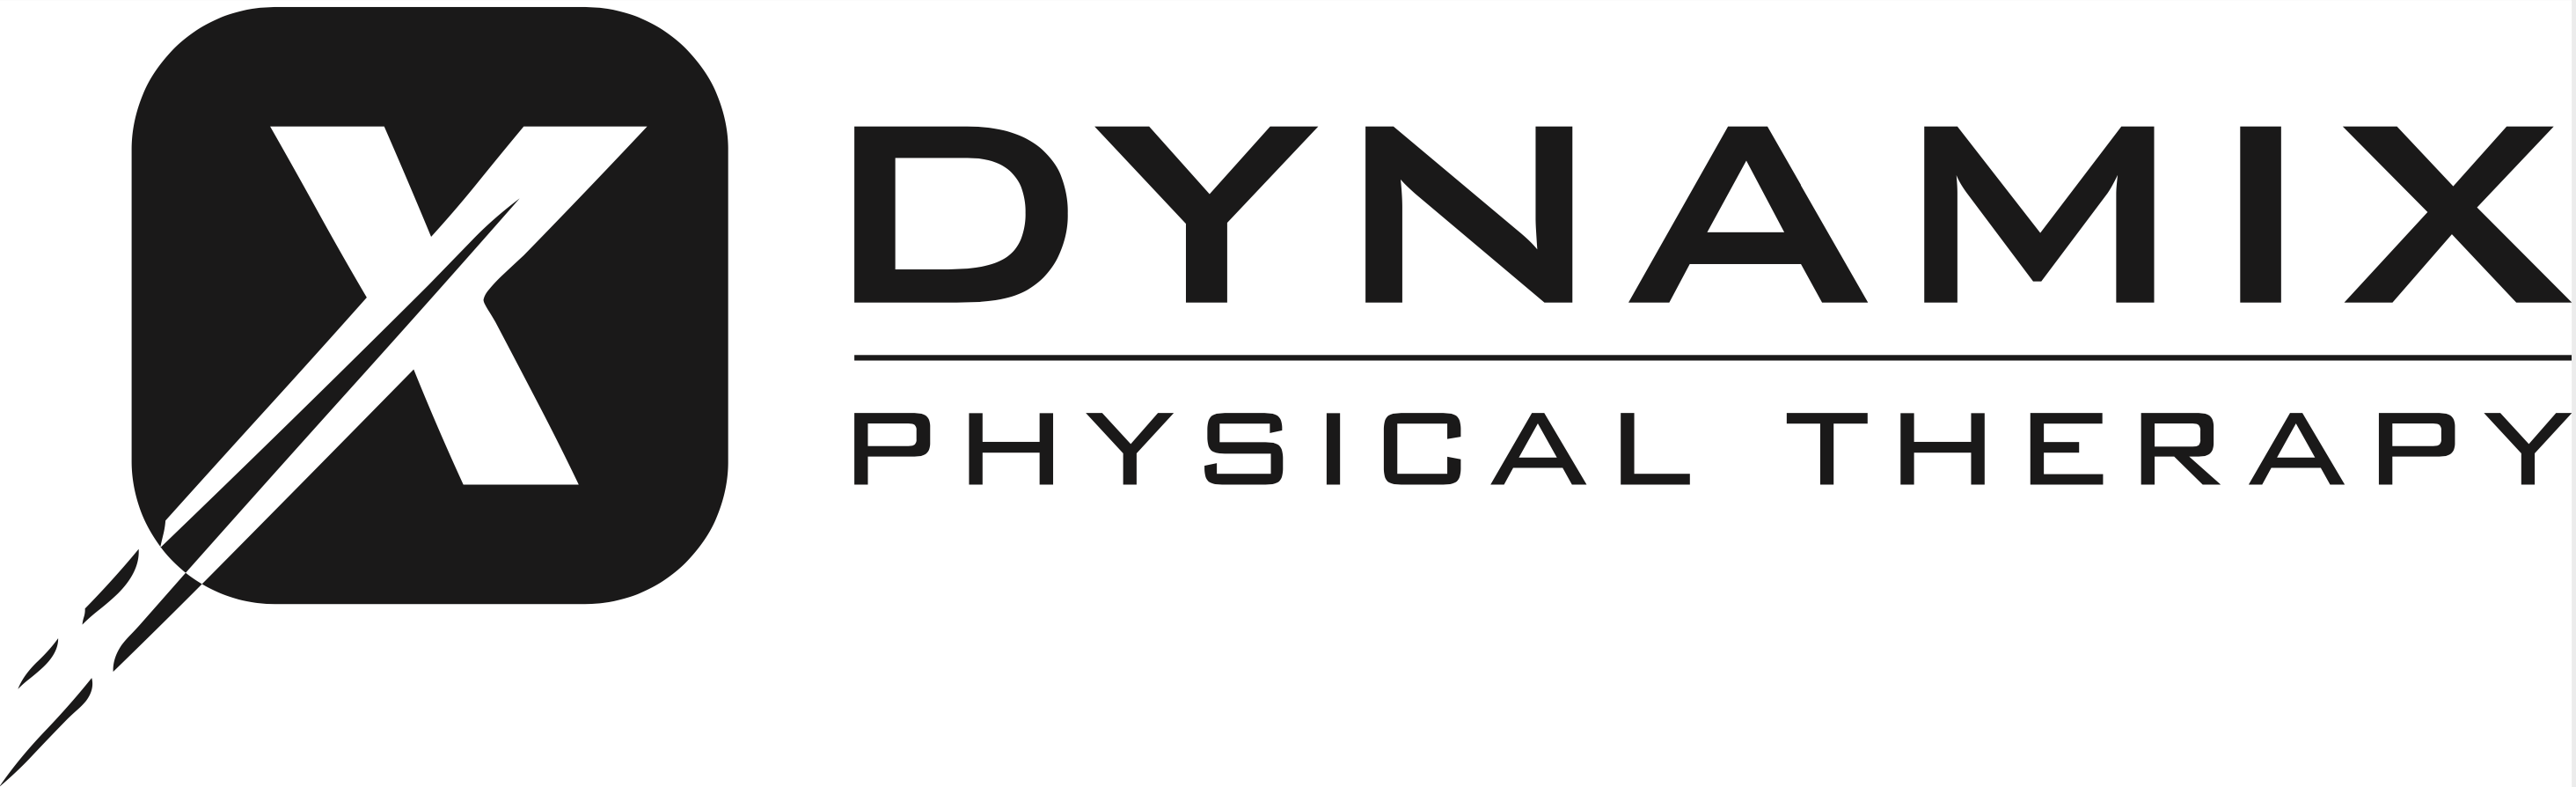 Member Monday - Dynamix Physical Therapy